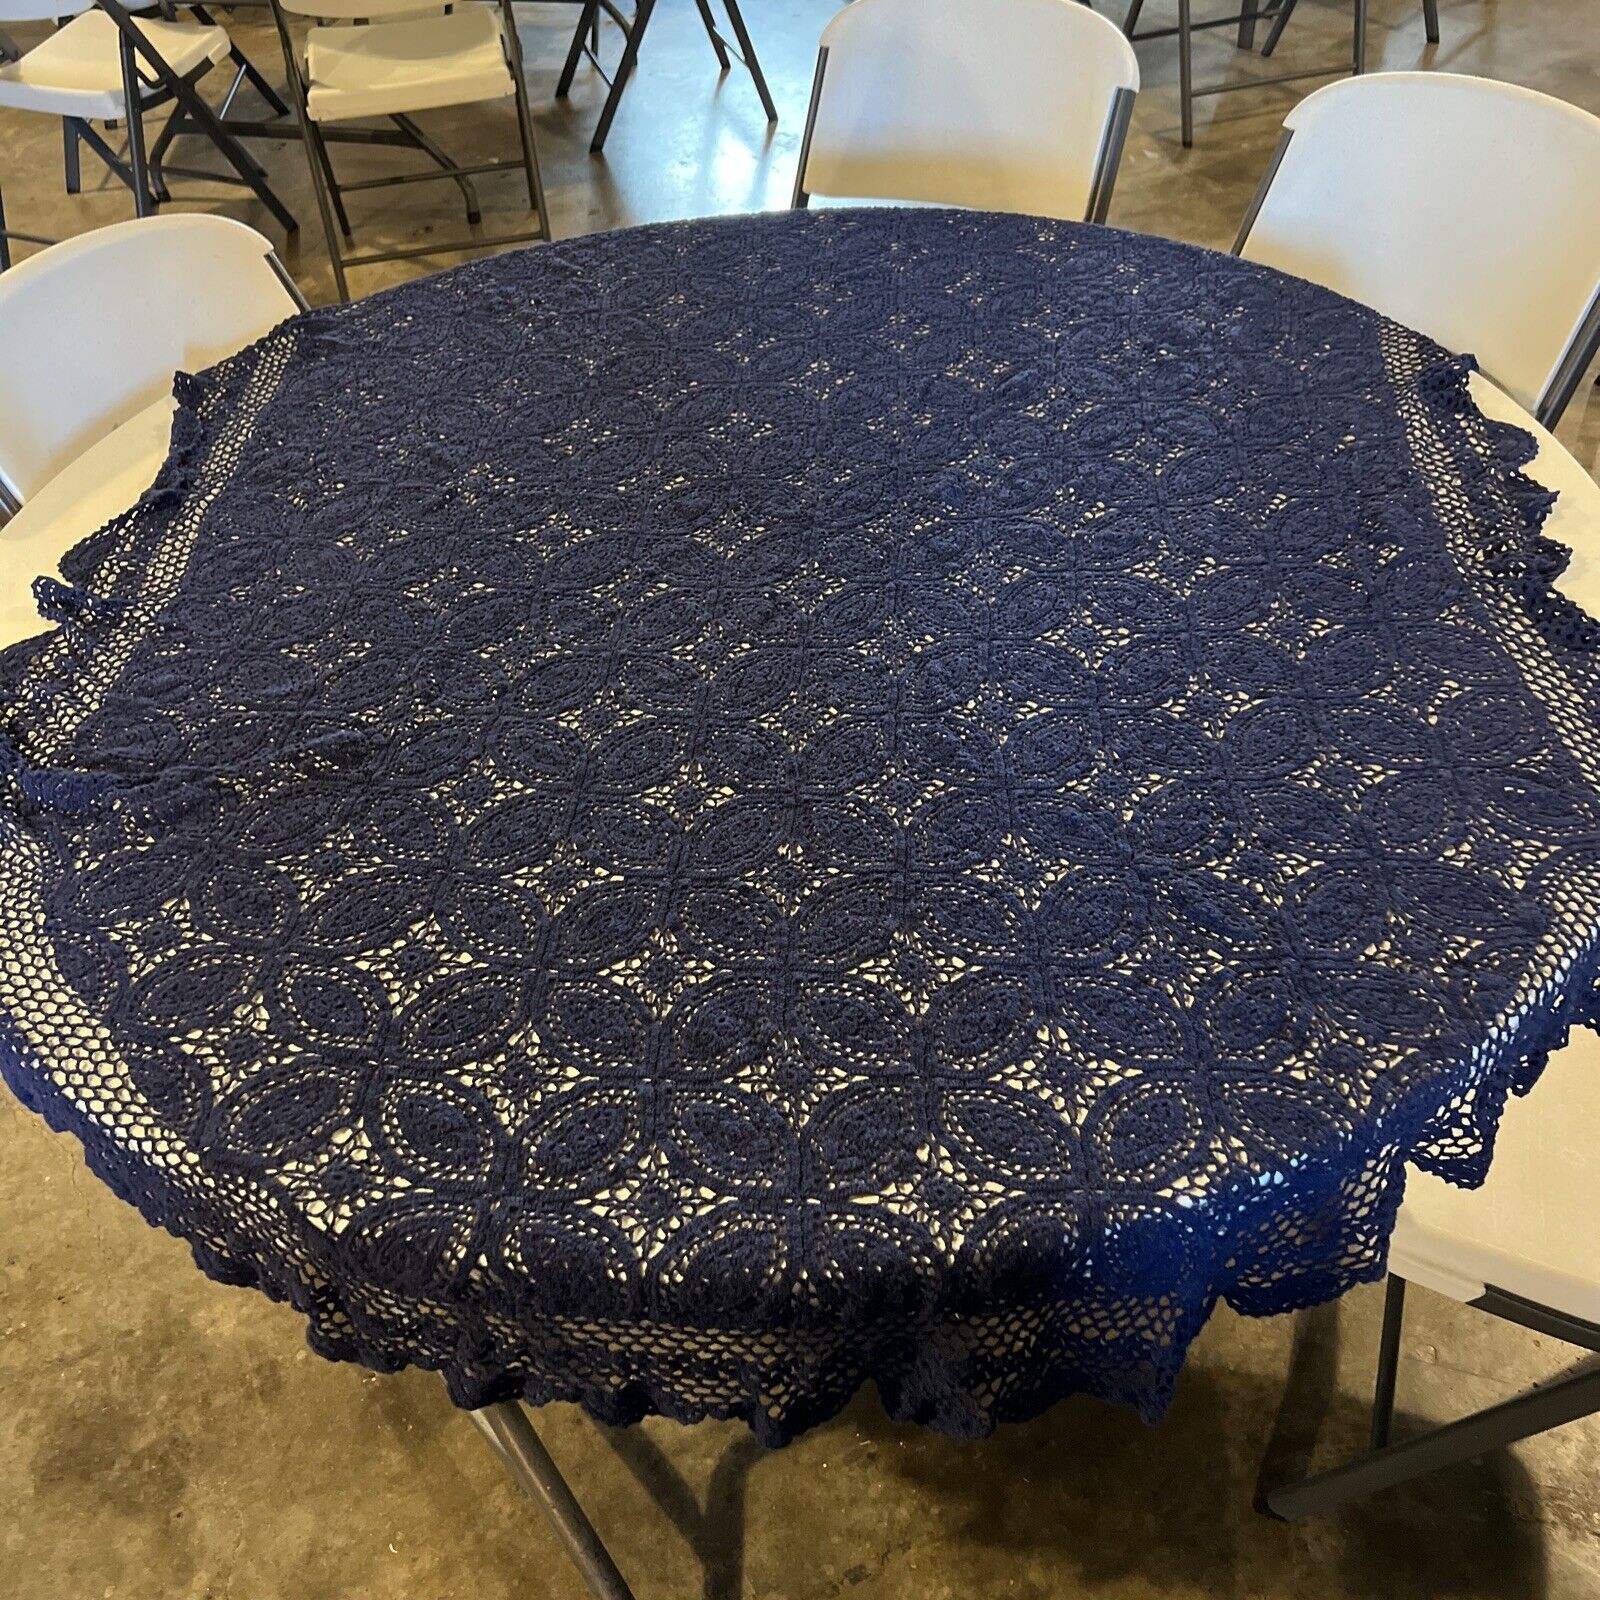 Hand Crocheted Doily tablecloth 55x76 Navy MCM